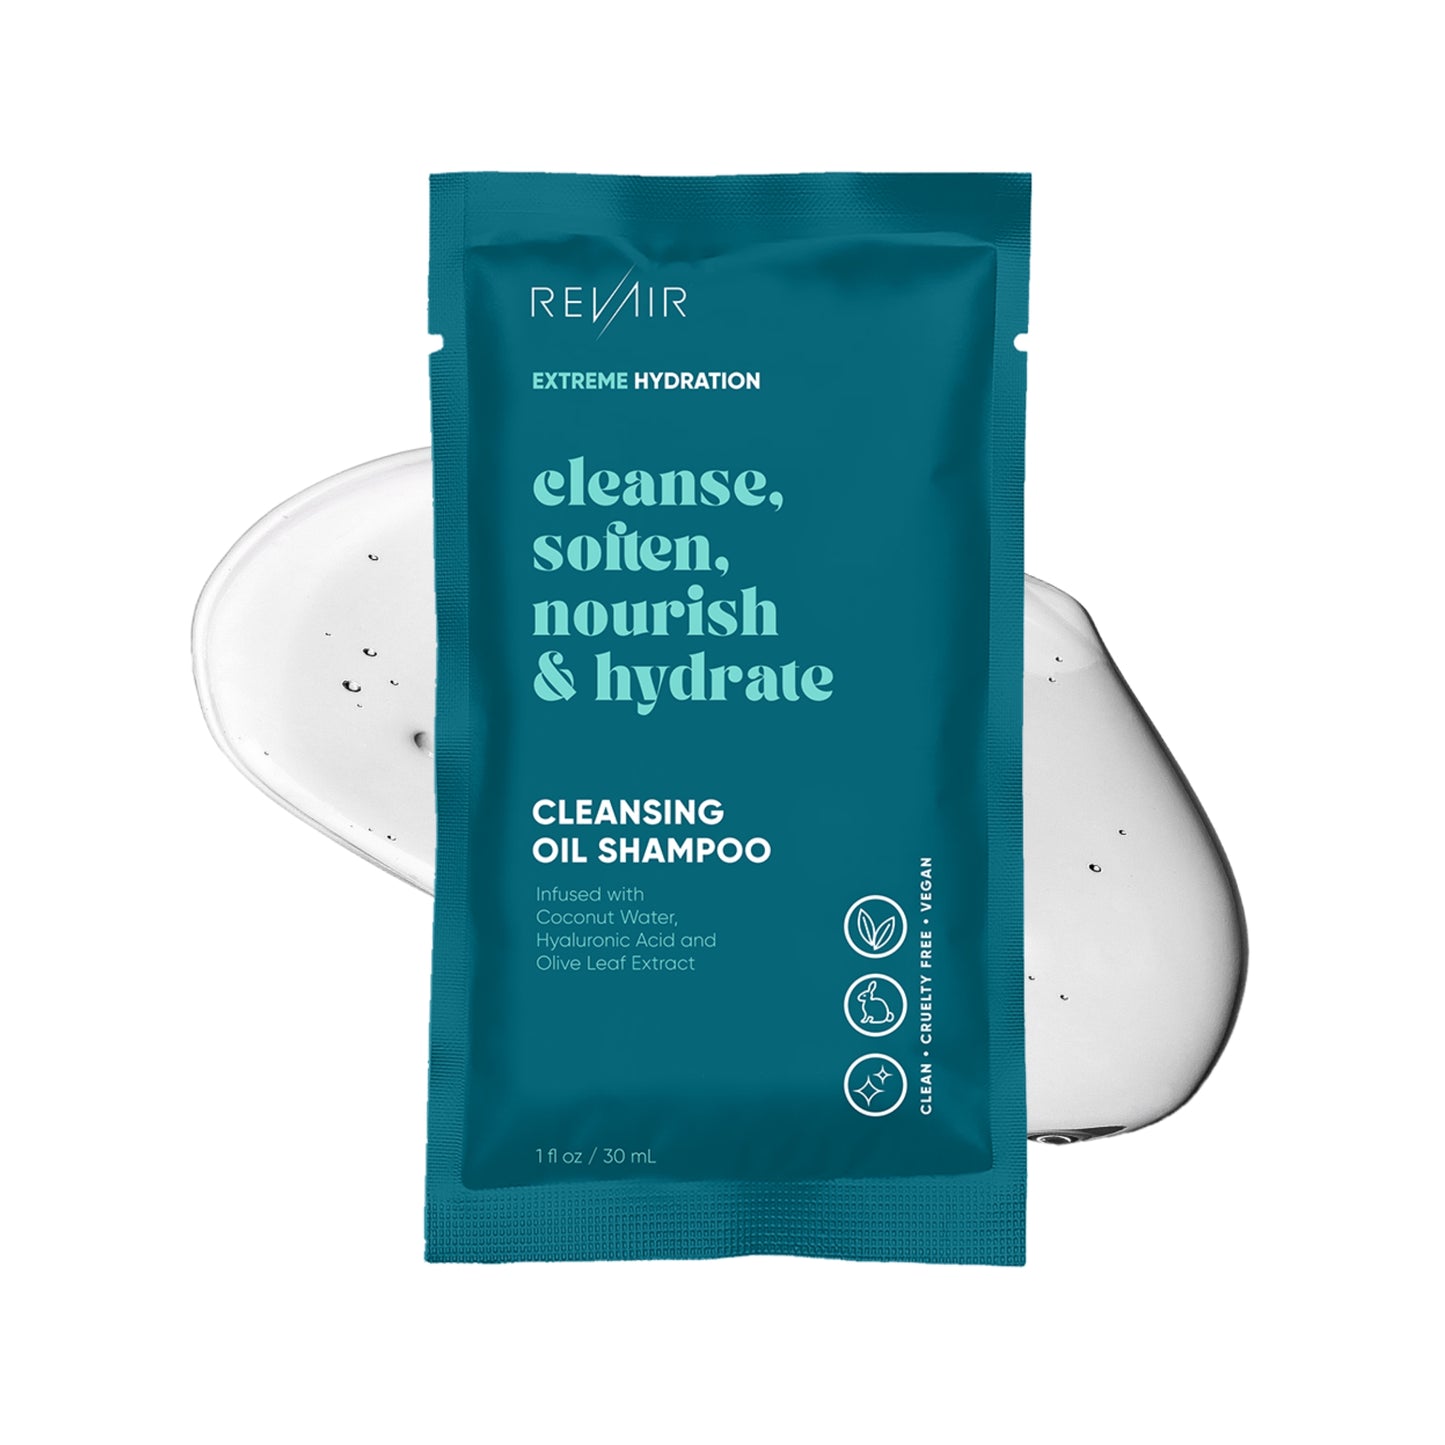 Extreme Hydration Cleansing Oil Shampoo Packet (1 oz)